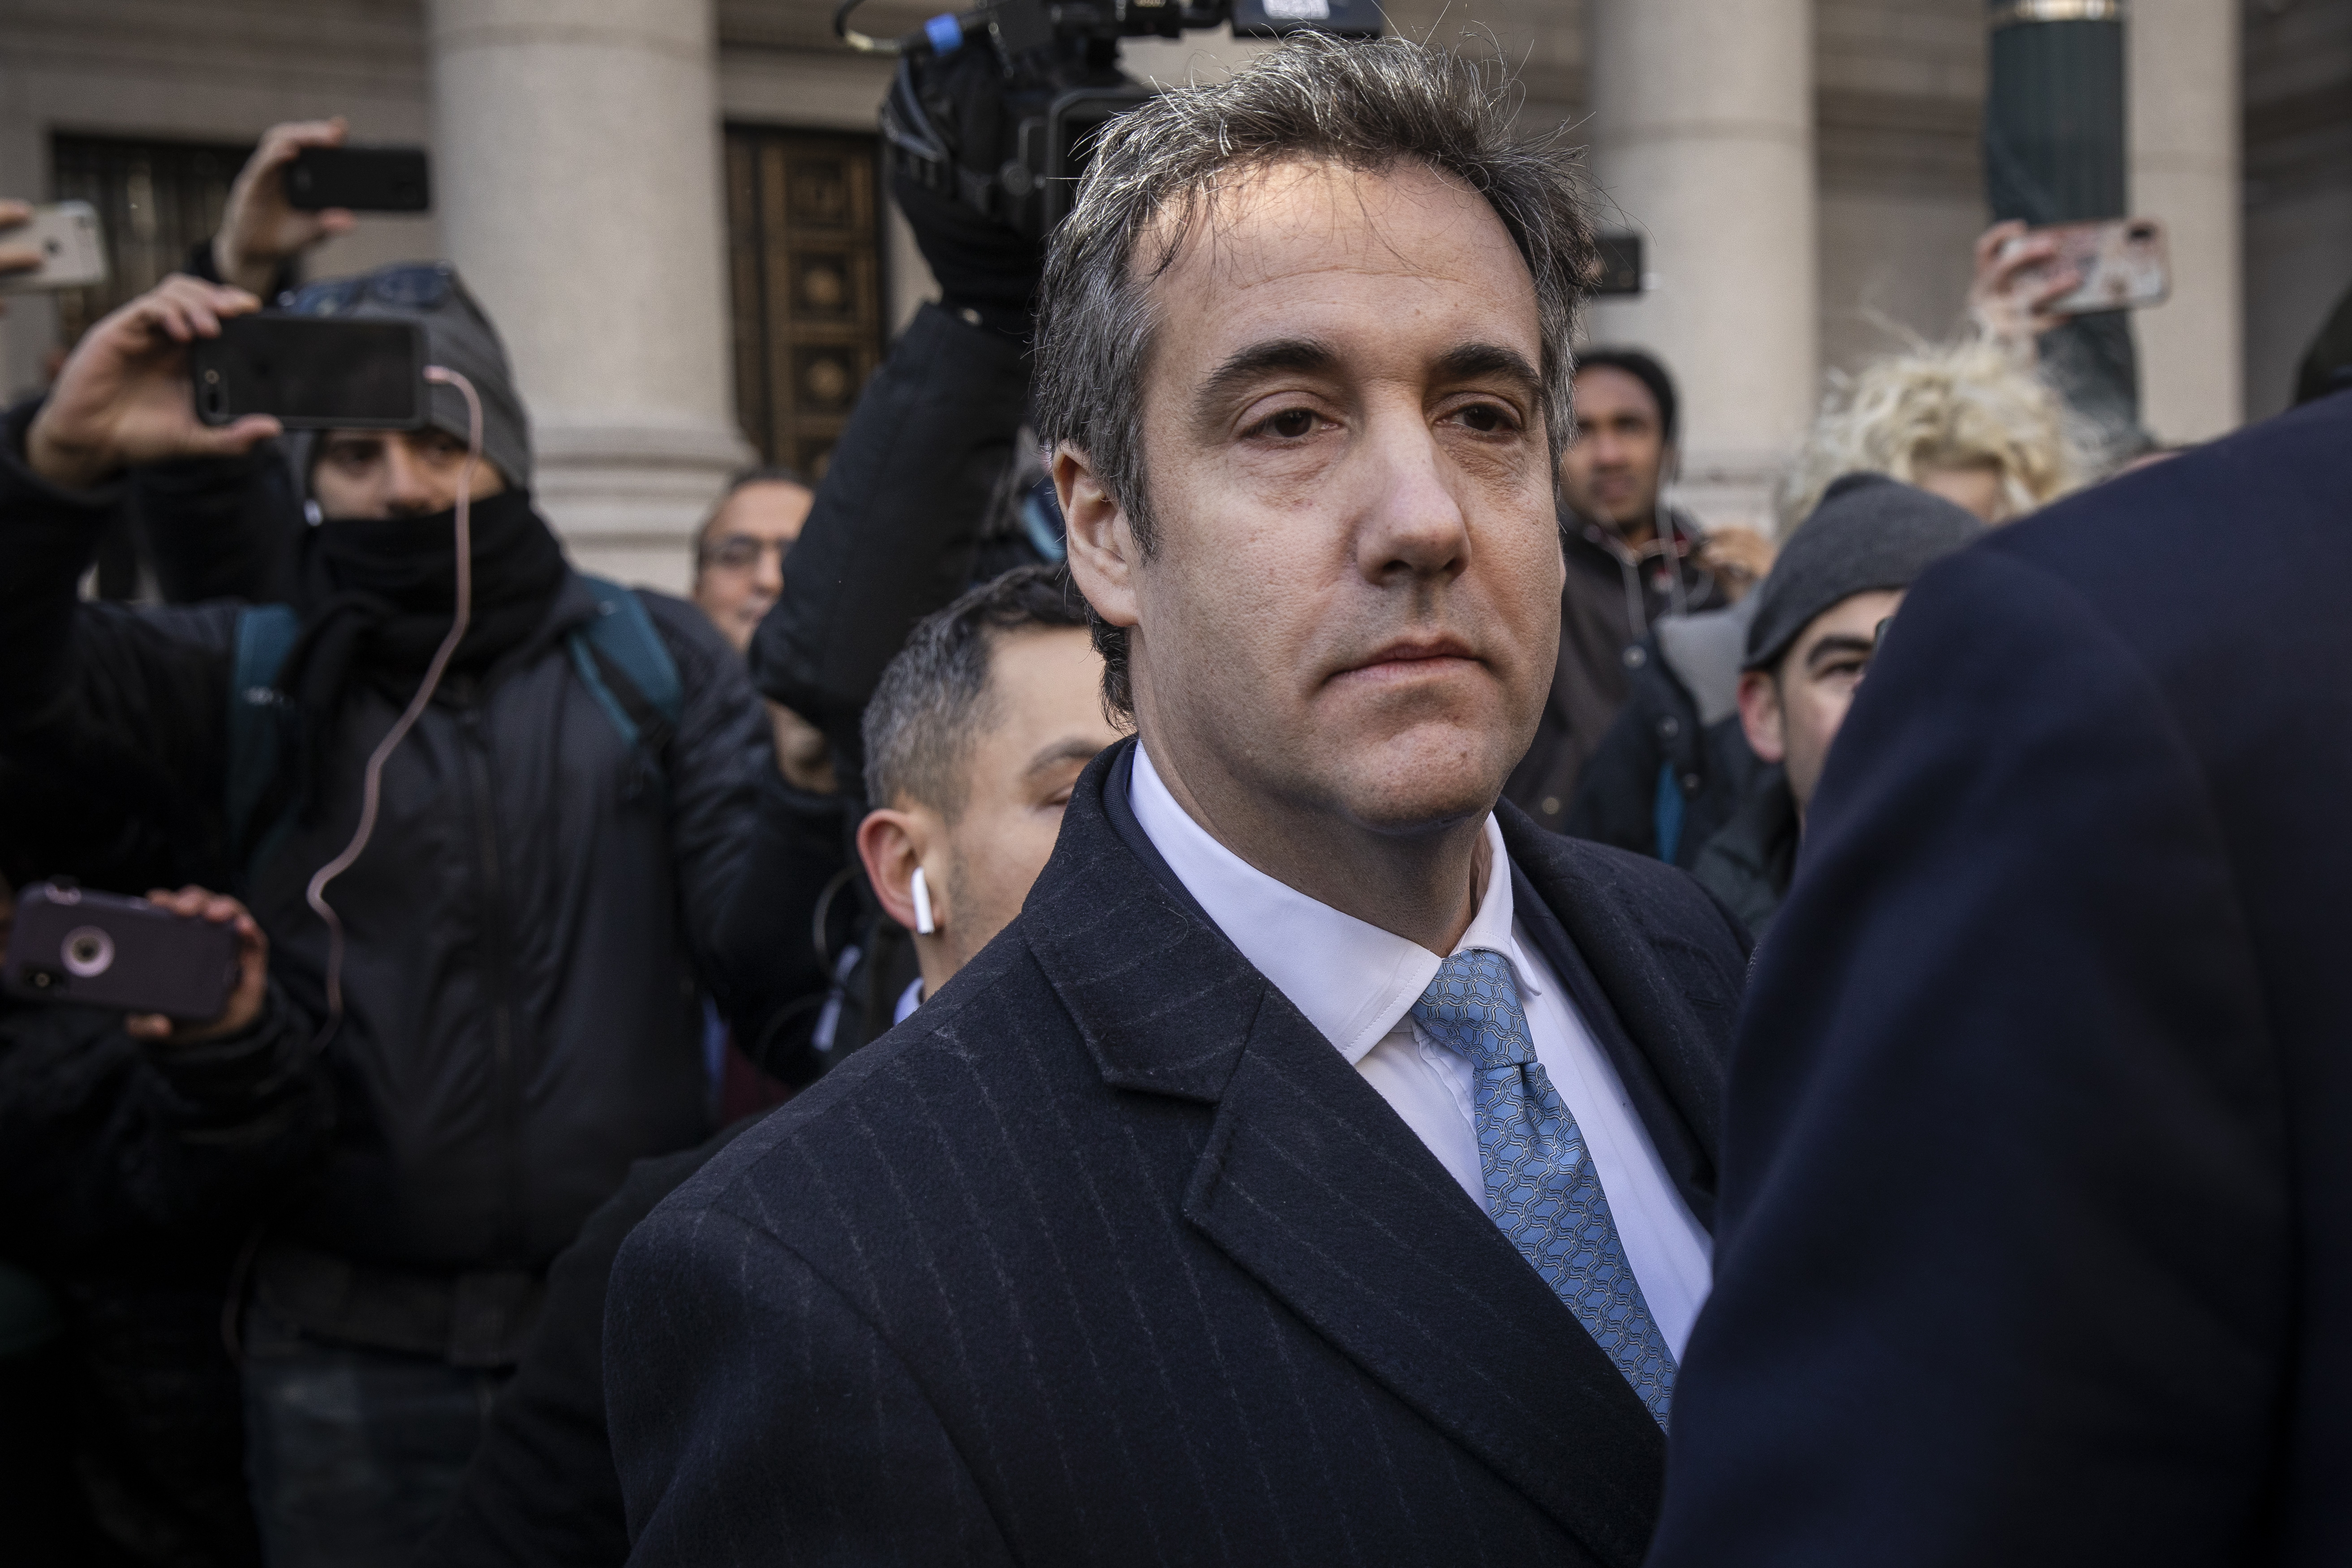 Michael Cohen, who pleaded guilty to making false statements to Congress in the Mueller investigation, exits federal court.